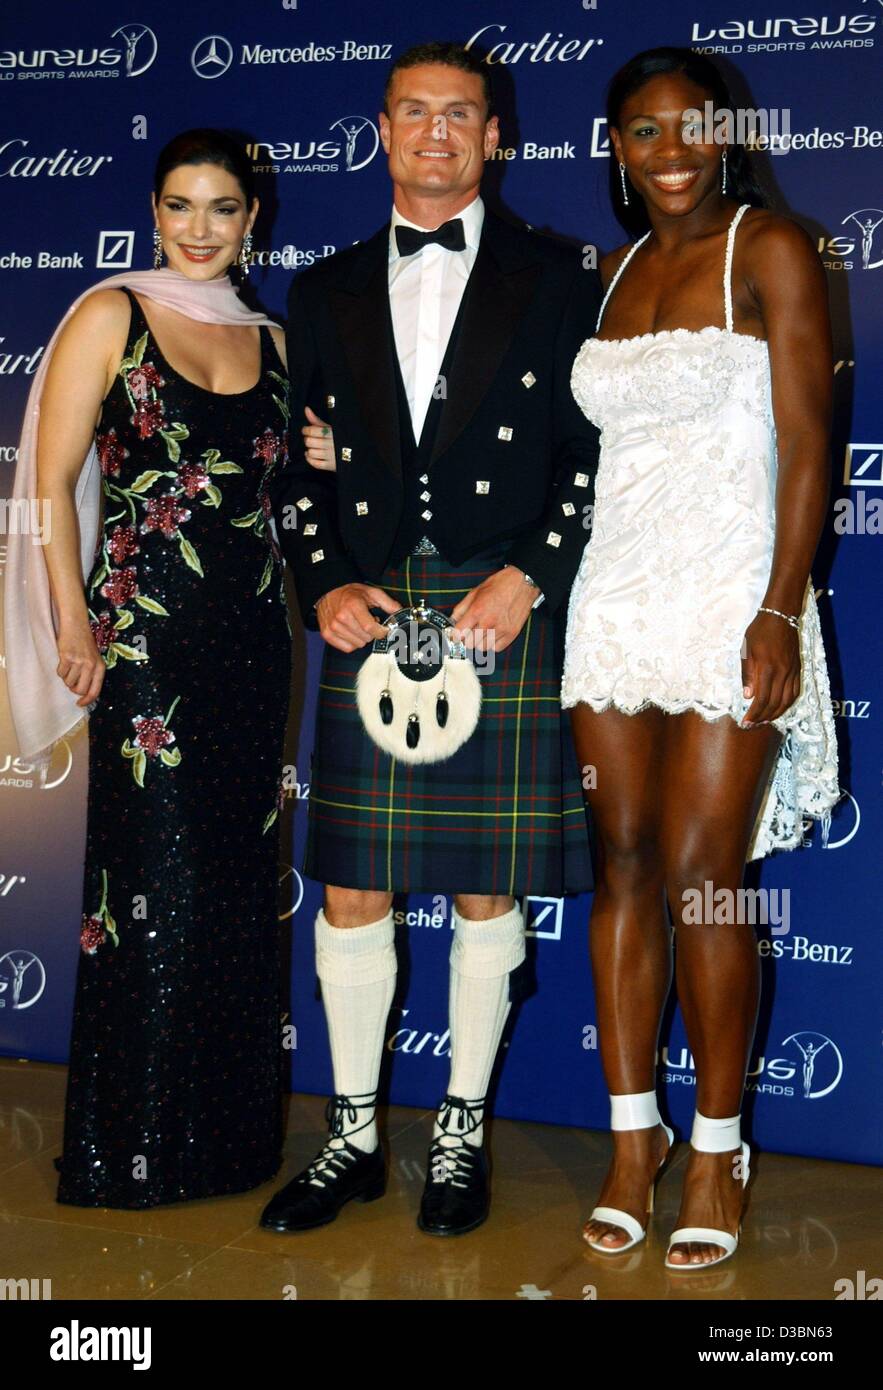 (dpa) - Scottish formula one pilot David Coulthard poses with US tennis player Serena Wiliams (R) and US actress Laura Harrig (L) at the Grimaldi Forum in Monte Carlo, 20 May 2003. Williams won an award in the category Sportswoman of the Year. Stock Photo